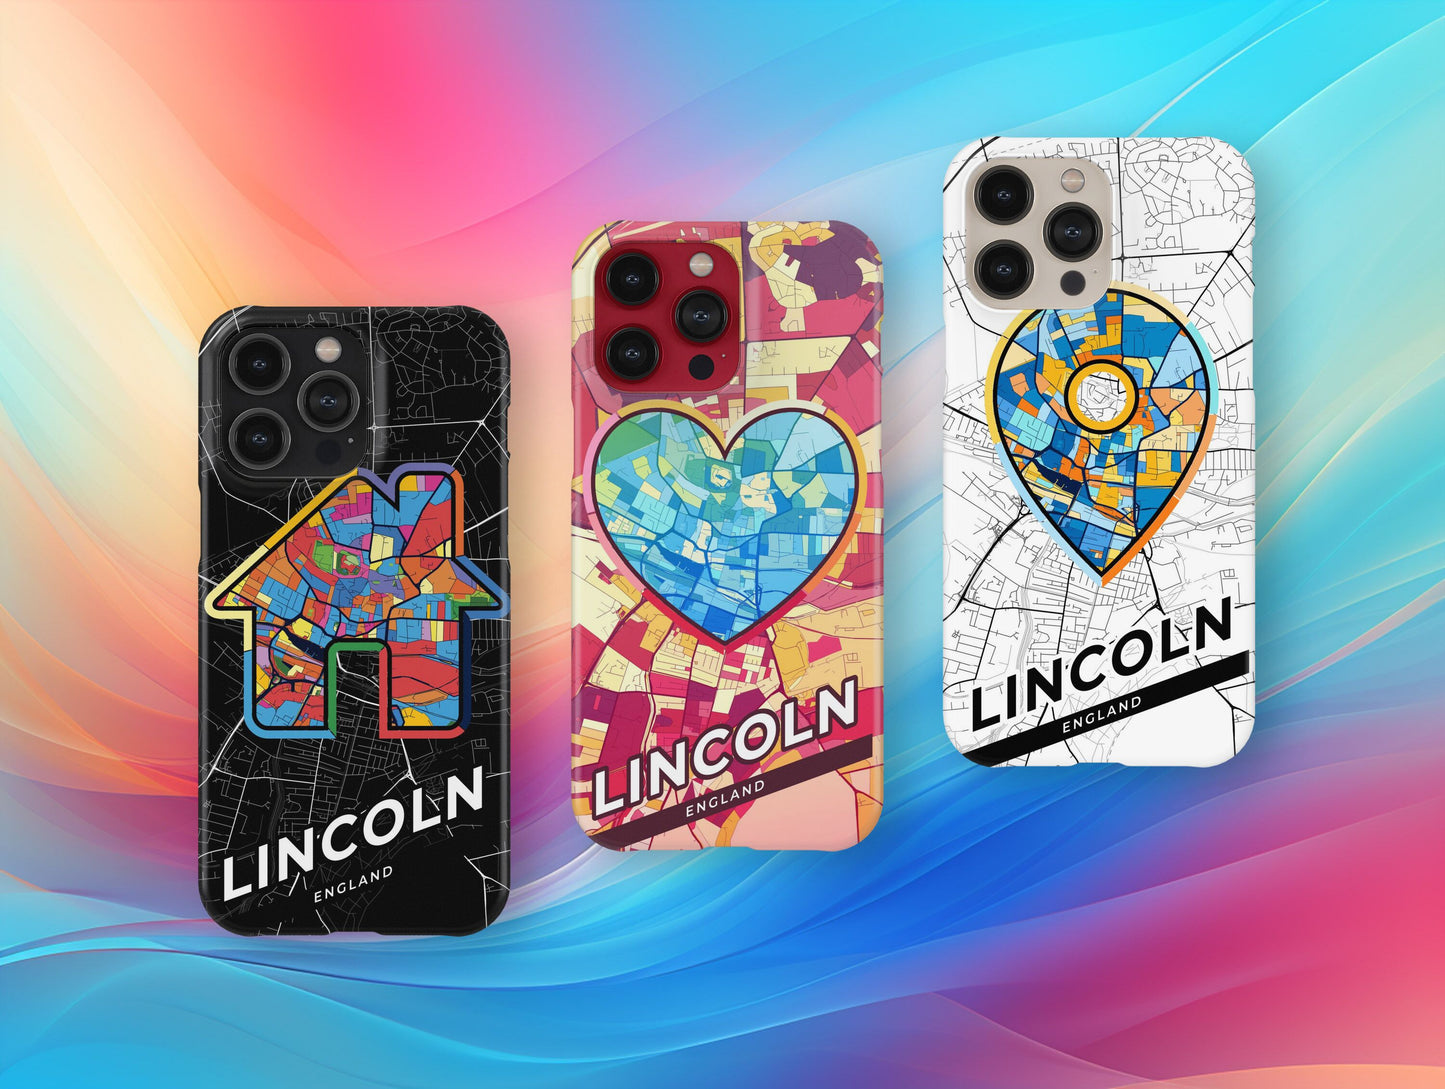 Lincoln England slim phone case with colorful icon. Birthday, wedding or housewarming gift. Couple match cases.